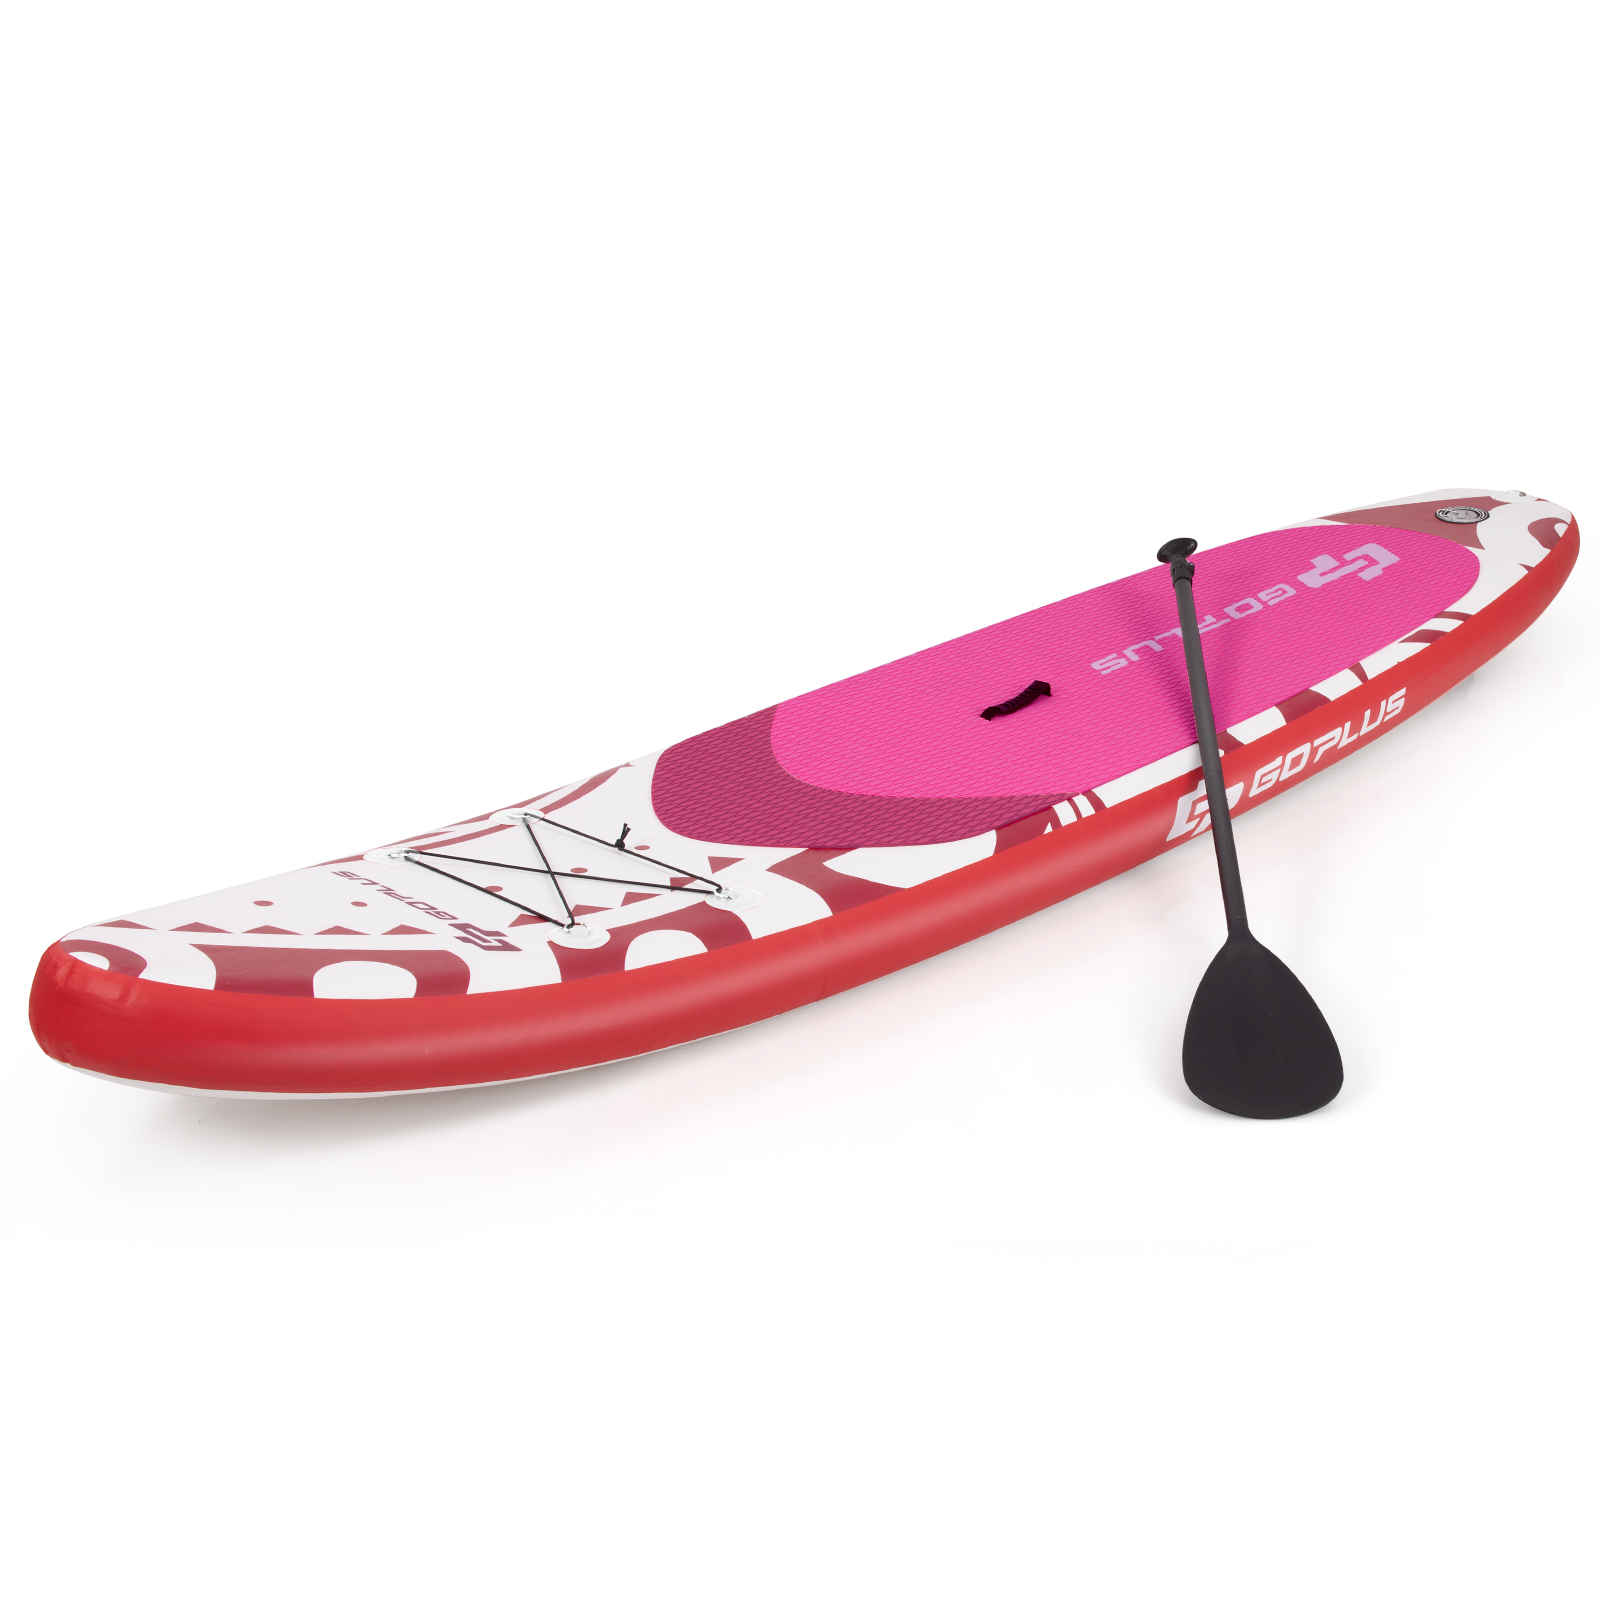 COSTWAY SUP Paddle, Stand Rosa Board Up